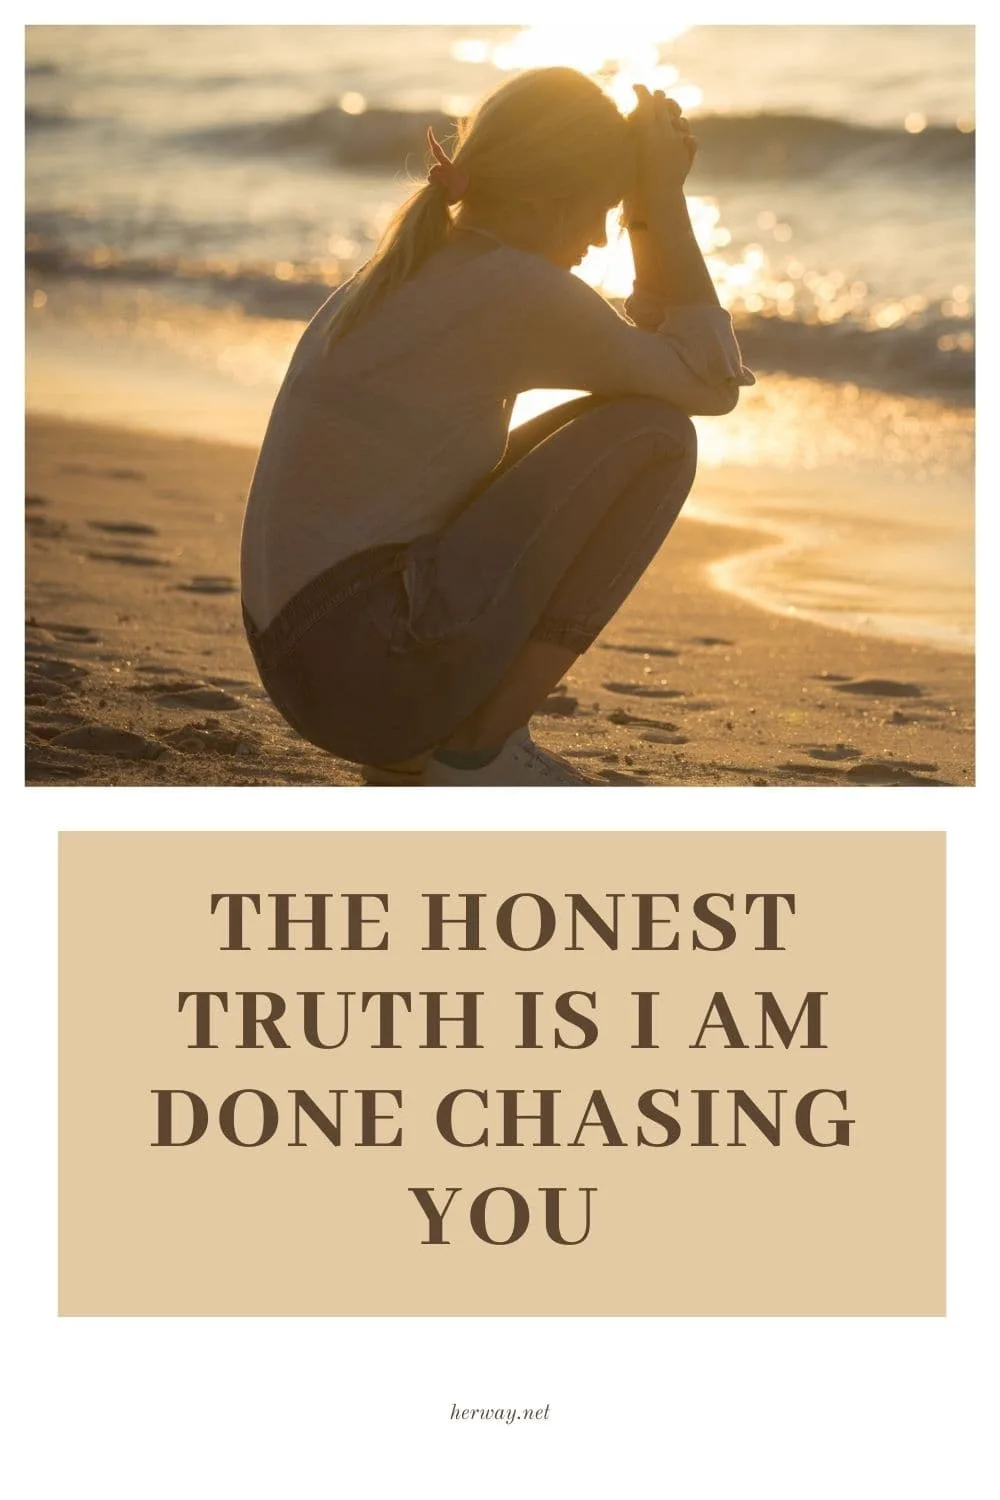 The Honest Truth Is I Am Done Chasing You